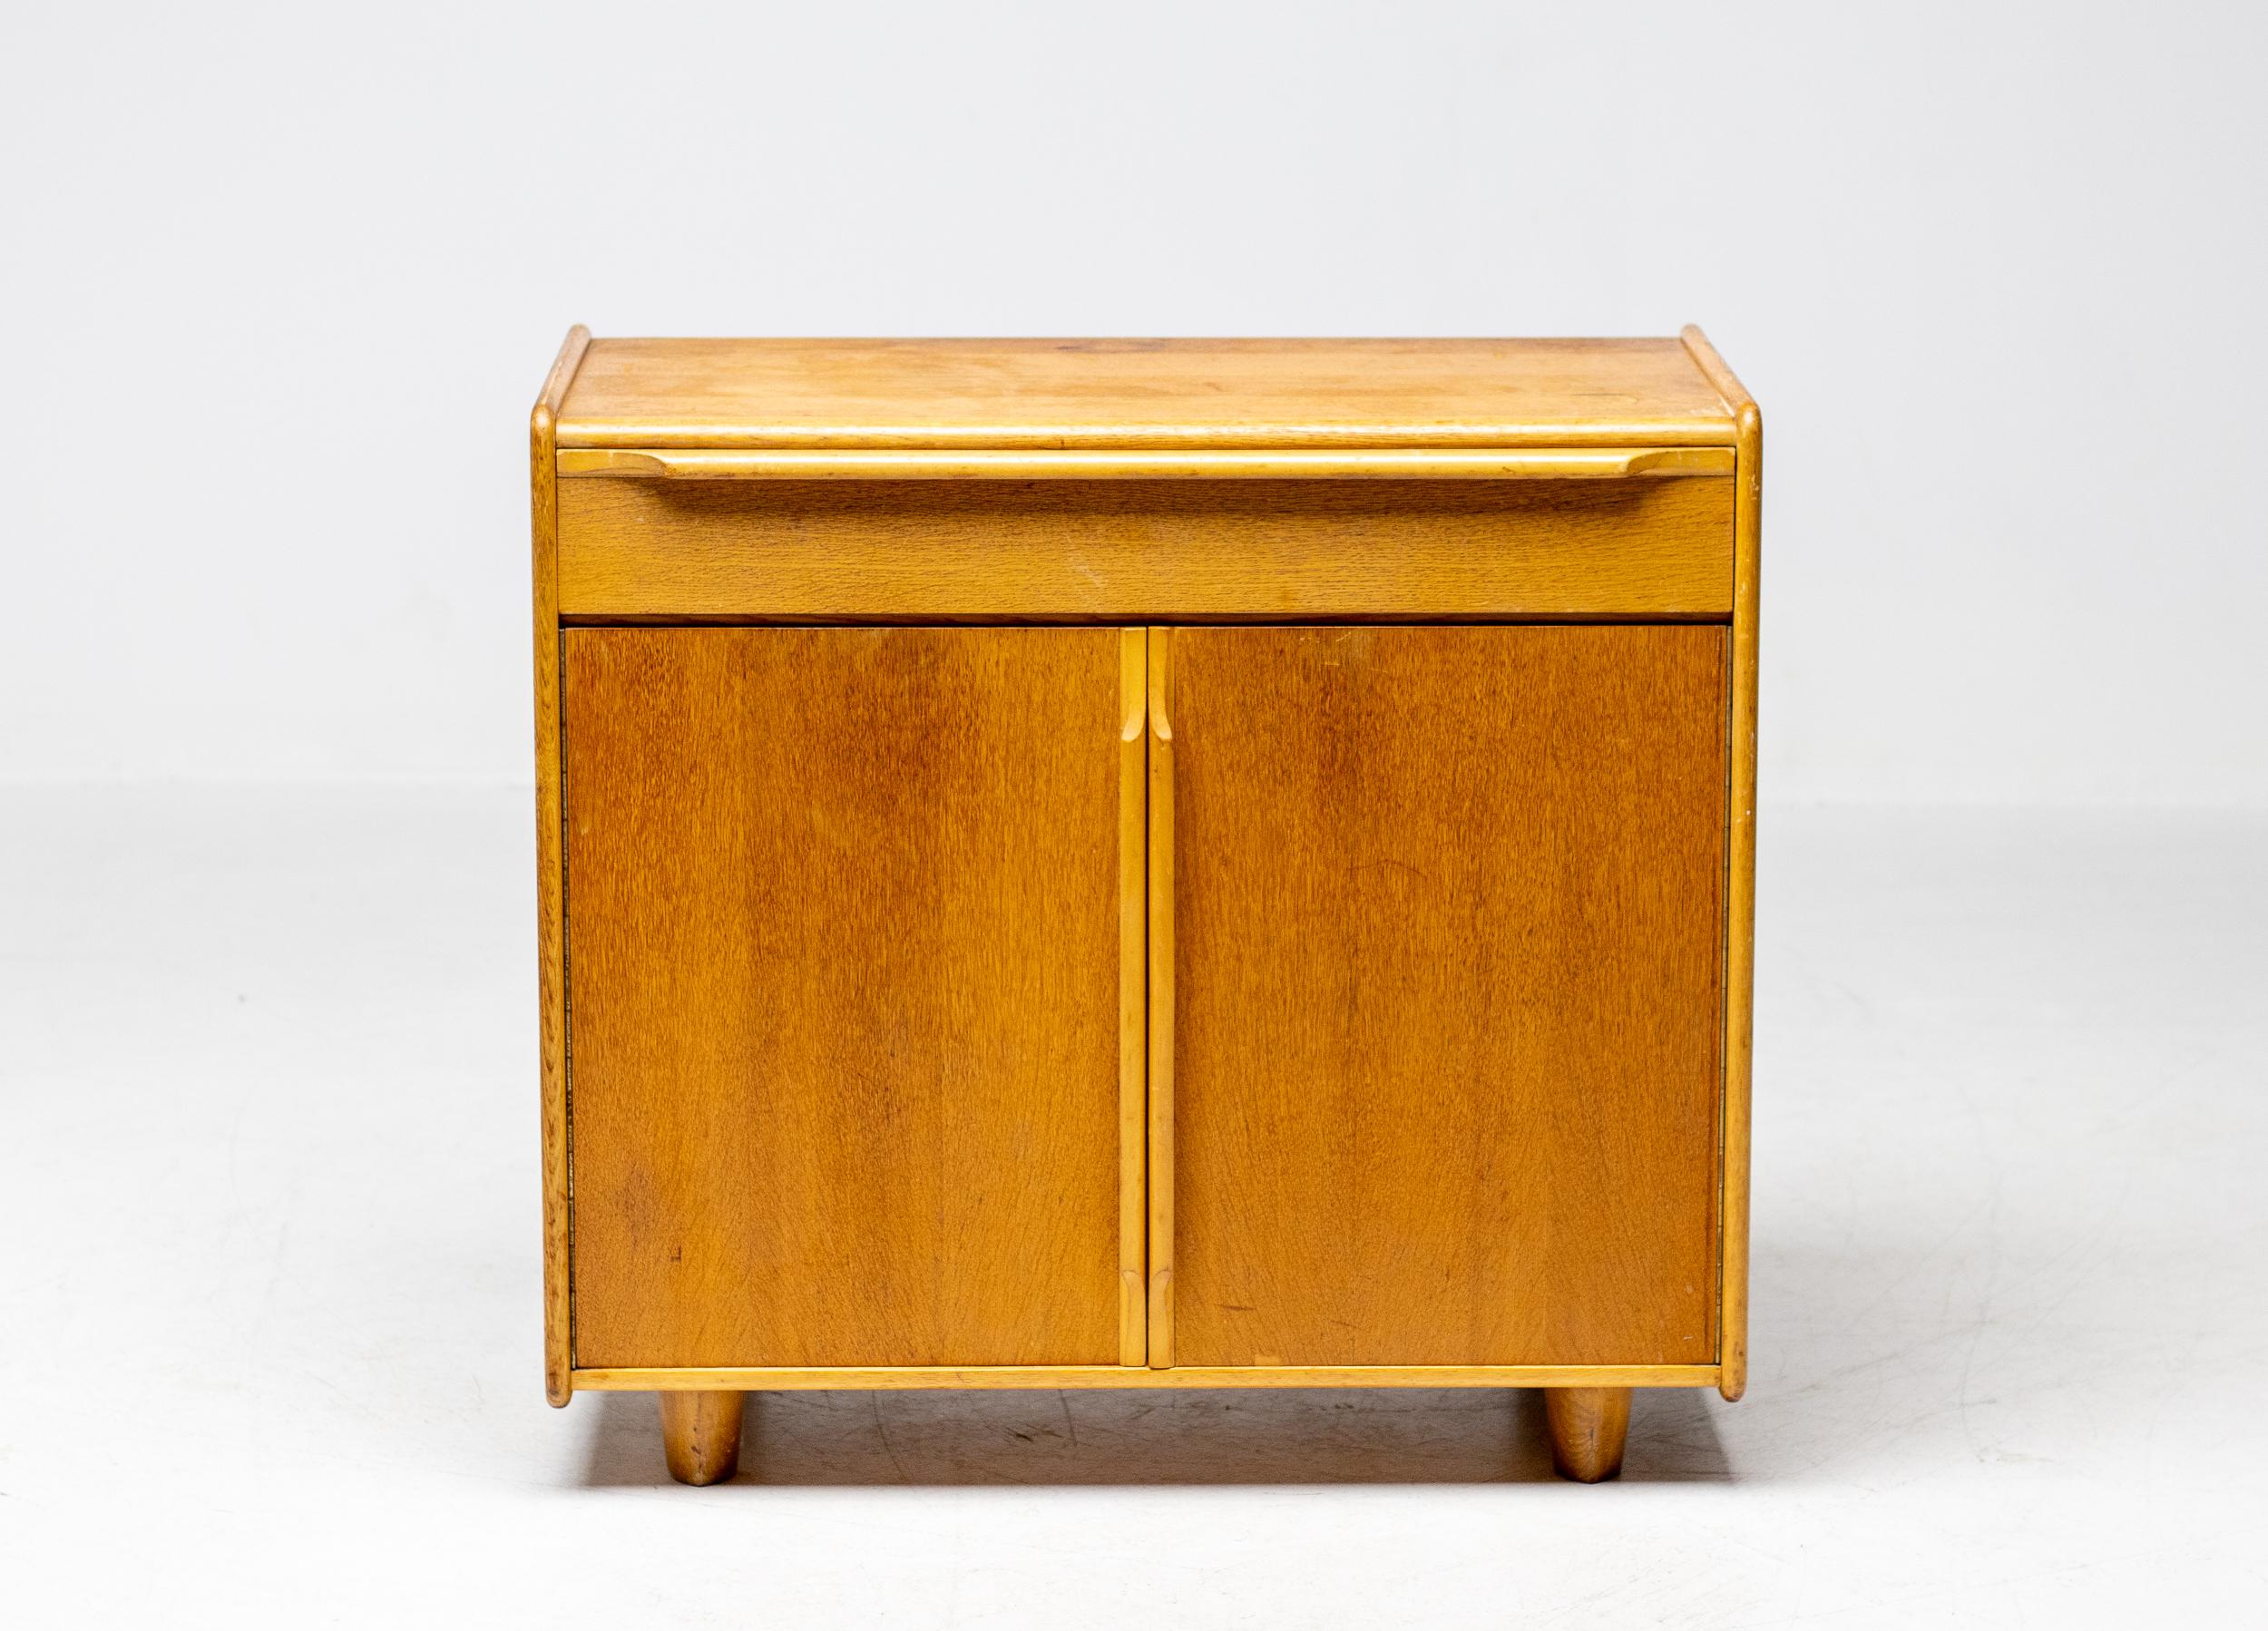 Compact dresser designed by Cees Braakman for UMS Pastoe the Netherlands.
Practical vintage modern design piece for a small apartment.
The cabinet is marked on the back with a Pastoe stamp.

Cees Braakman (1917-1995) was a Dutch furniture